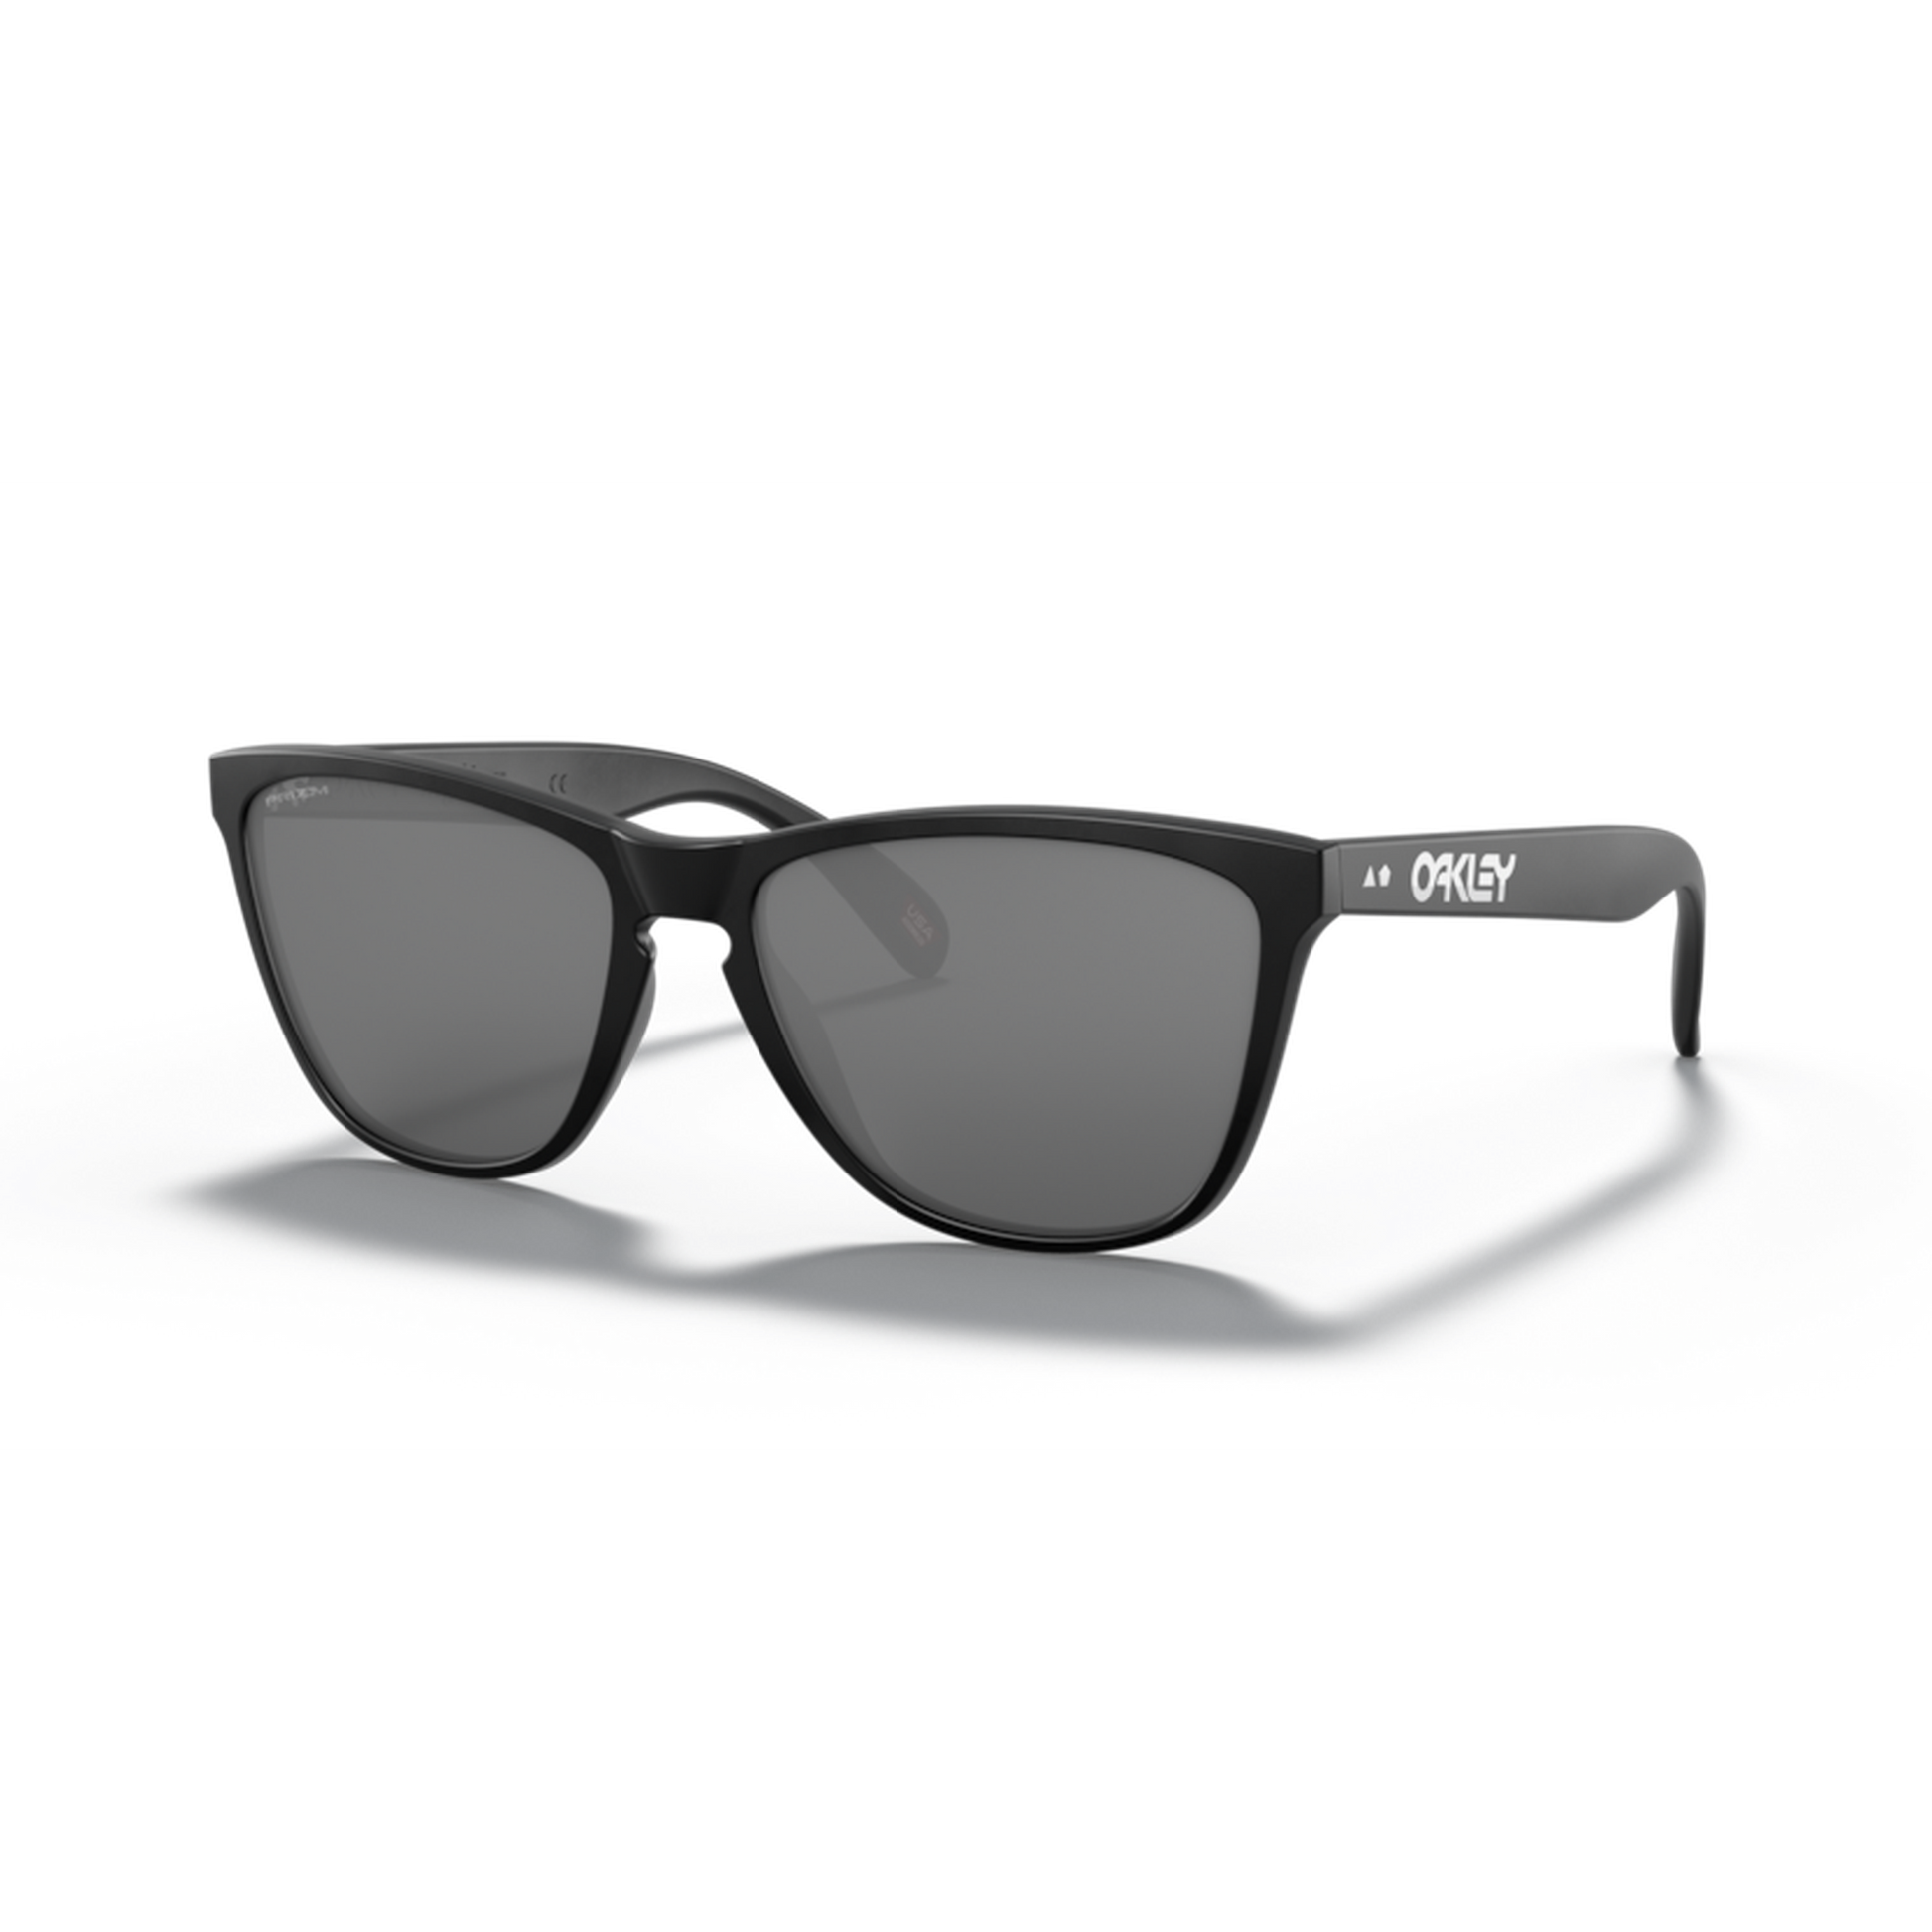 Oakley Frogskins | Complete Cyclist - In pop culture, it was a time like no other. Ronald Reagan was in the White House, The Terminator was in the box office and Run DMC was in certified gold. It was also the time when Oakley created one-of-a-kind sunglasses called Frogskins. 